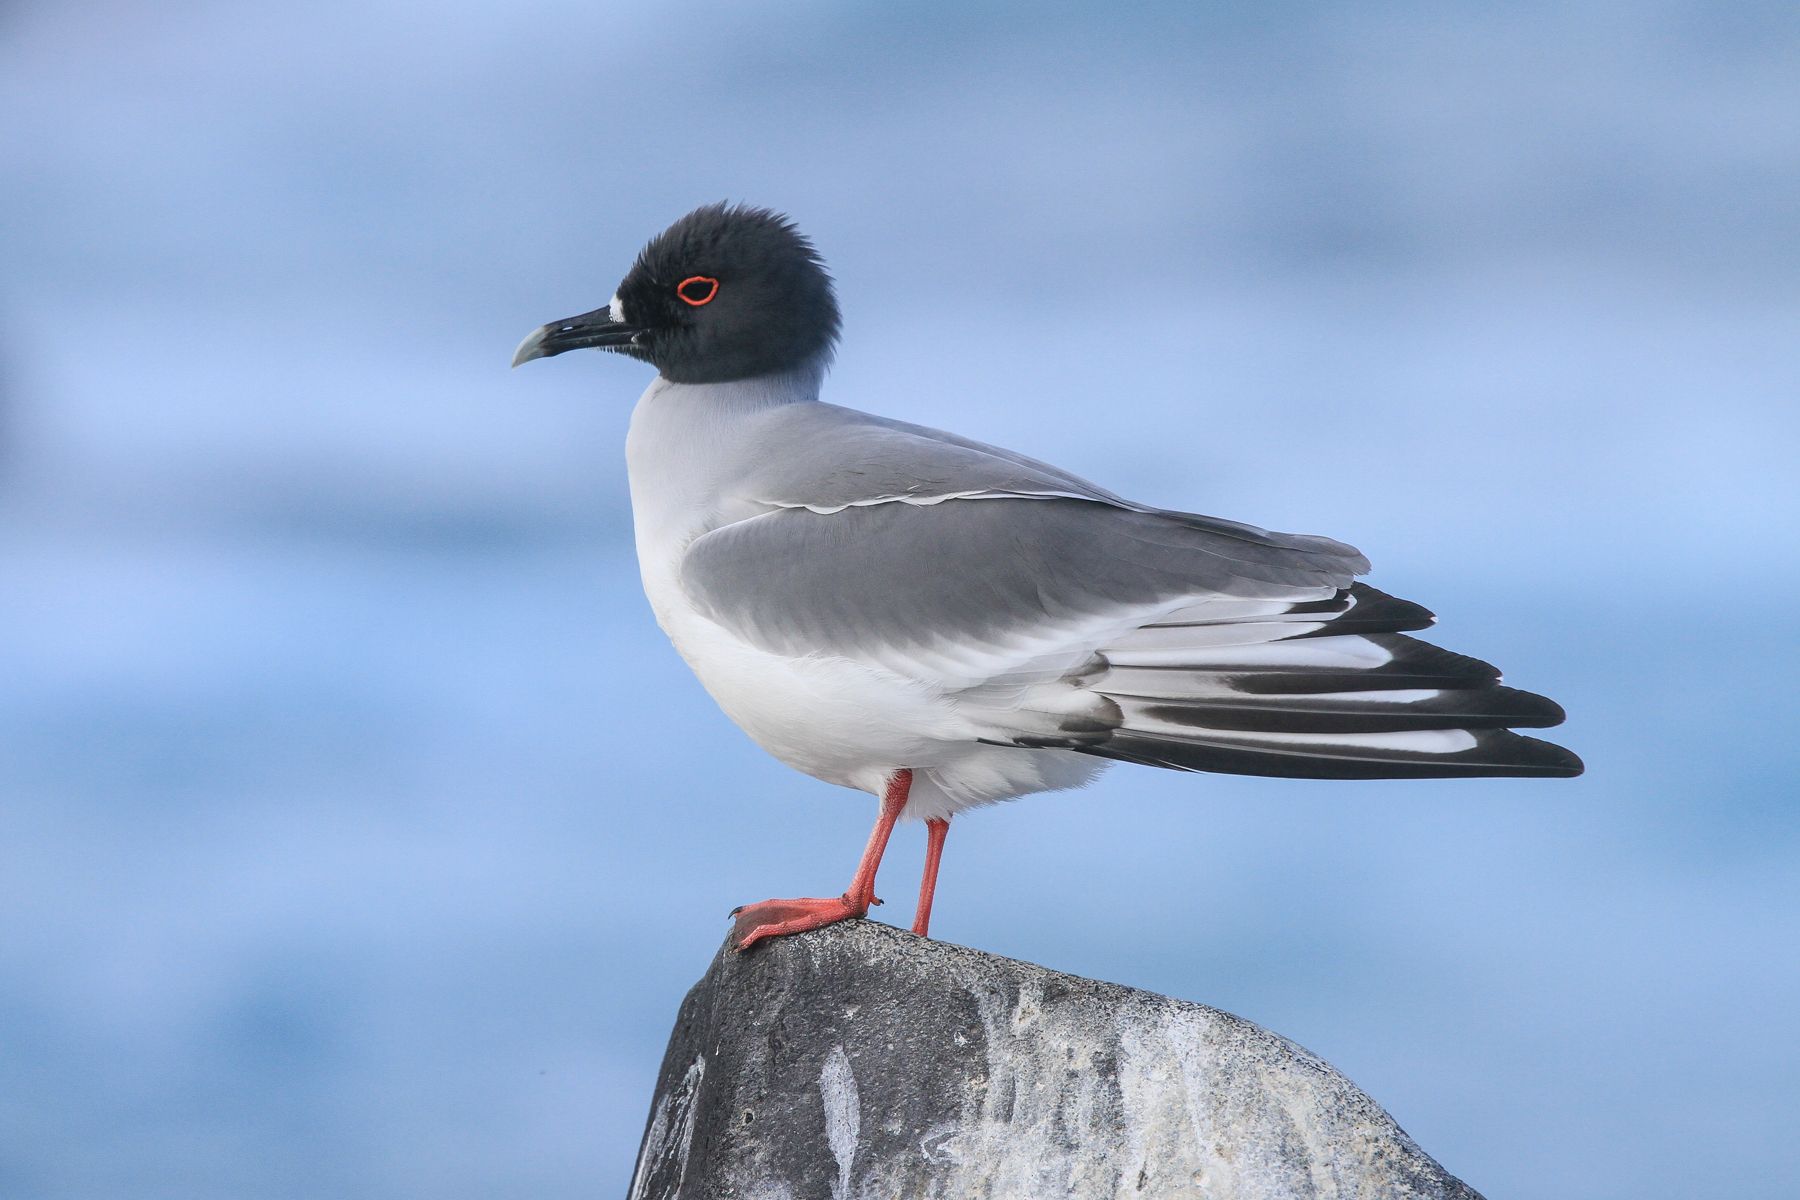 One of the most beautiful Galapagos seabirds is the Swallow-tailed Gull